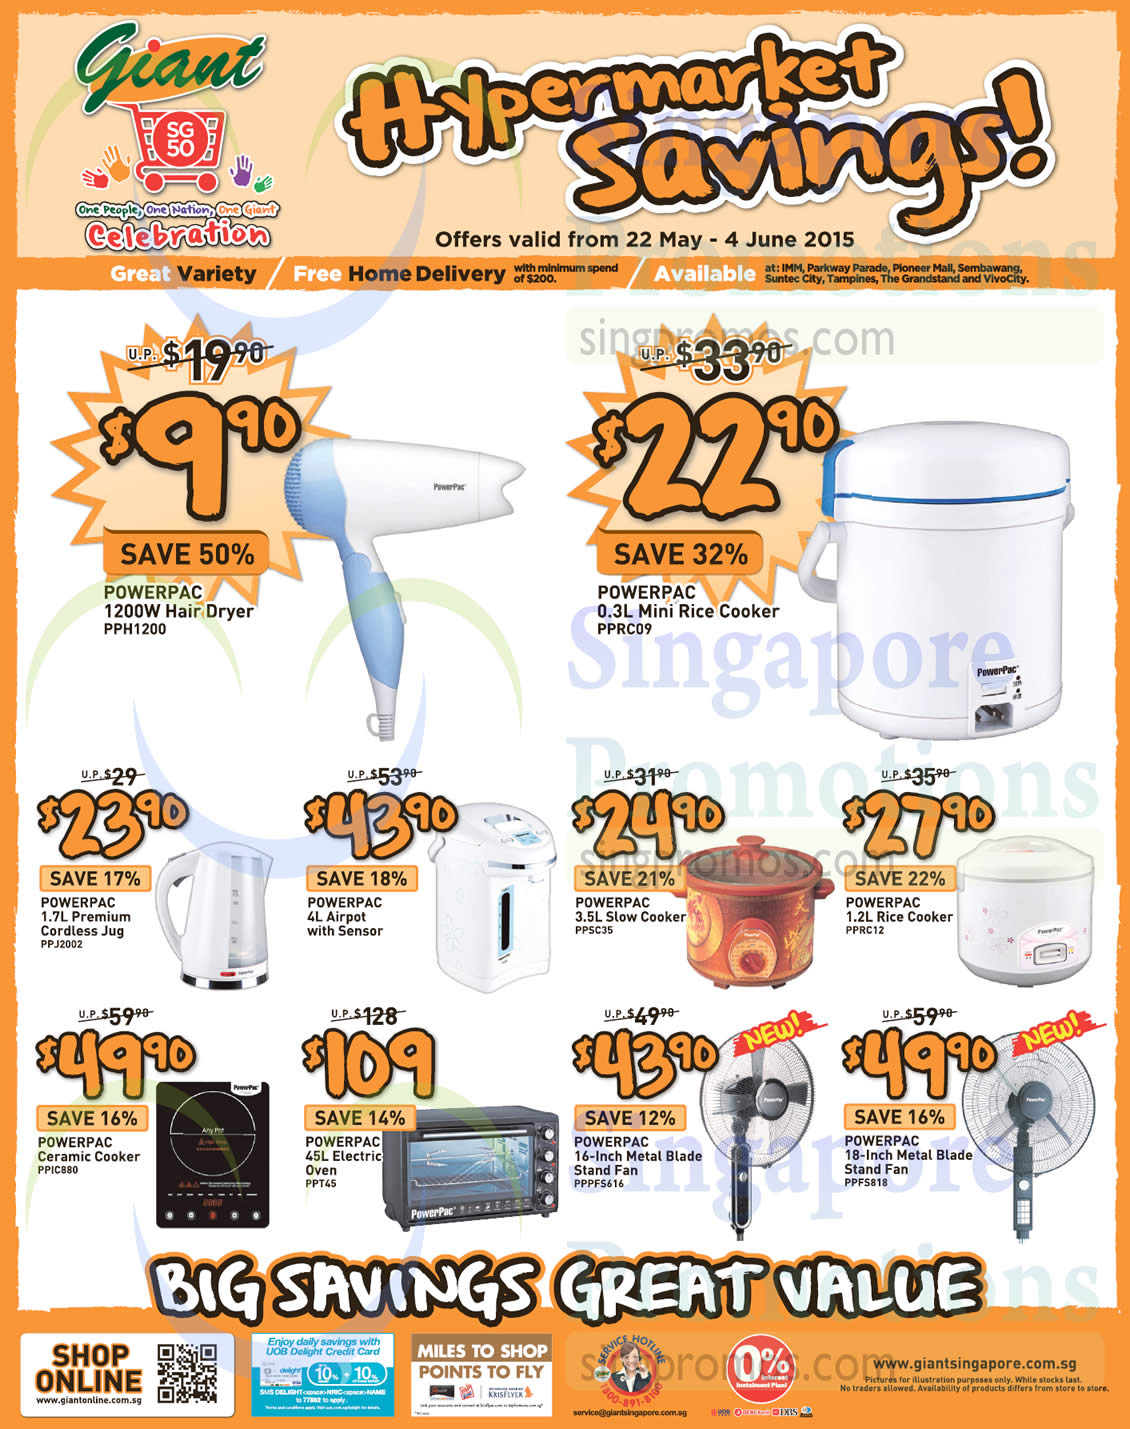 Featured image for Giant Hypermarket Appliances, TVs, Electric Scooters & More Offers 22 May - 4 Jun 2015